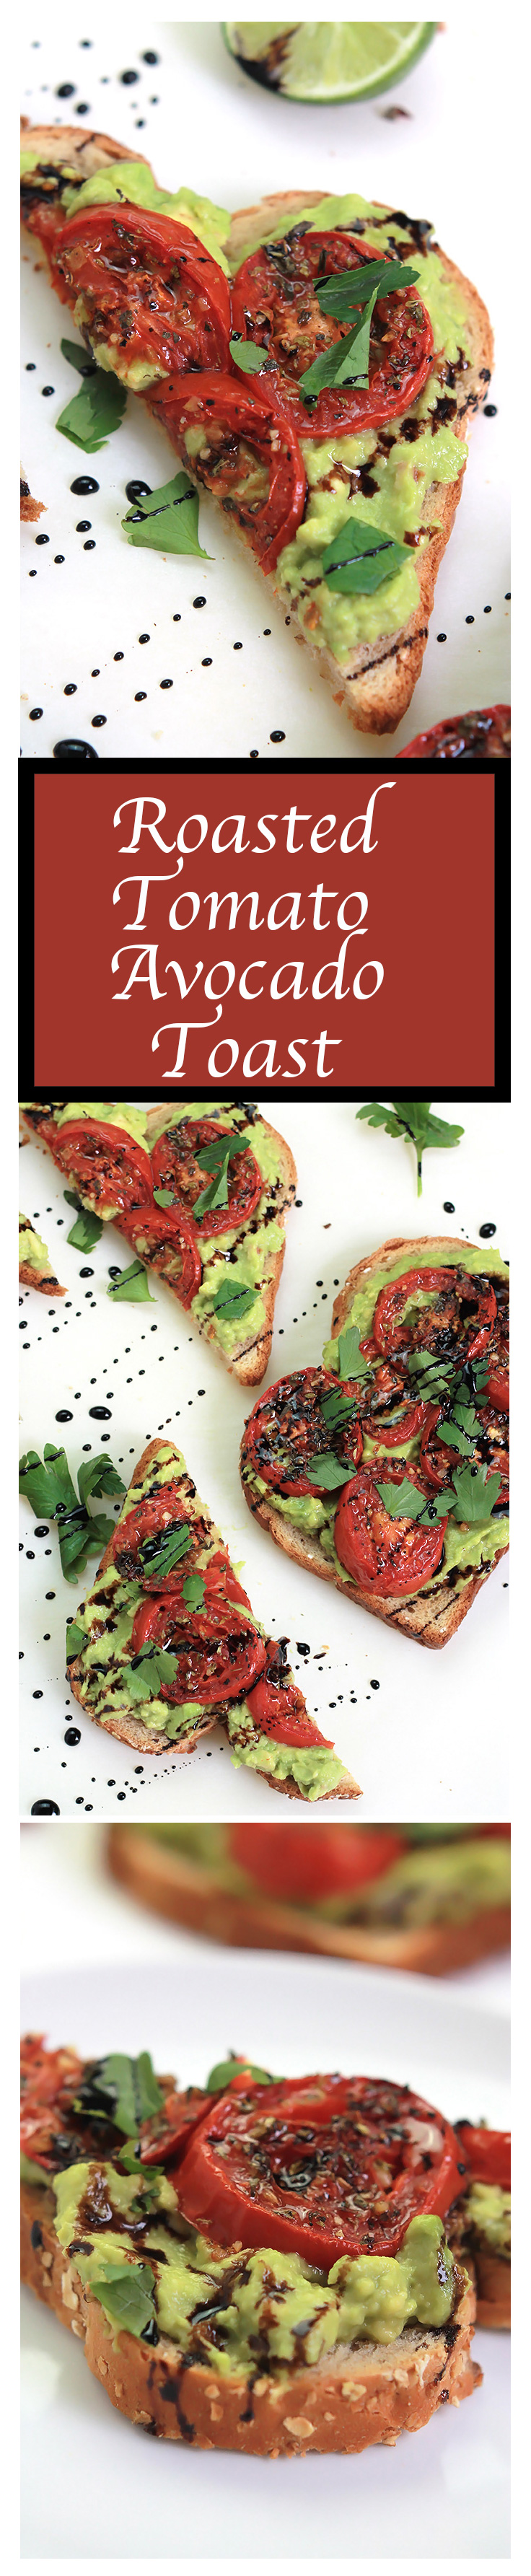 Simple, easy and delicious - Roasted Tomato Avocado Toast. Creamy Avocado mash, sweet roasted tomatoes, drizzled with balsamic glaze, it takes toast to a whole new level.